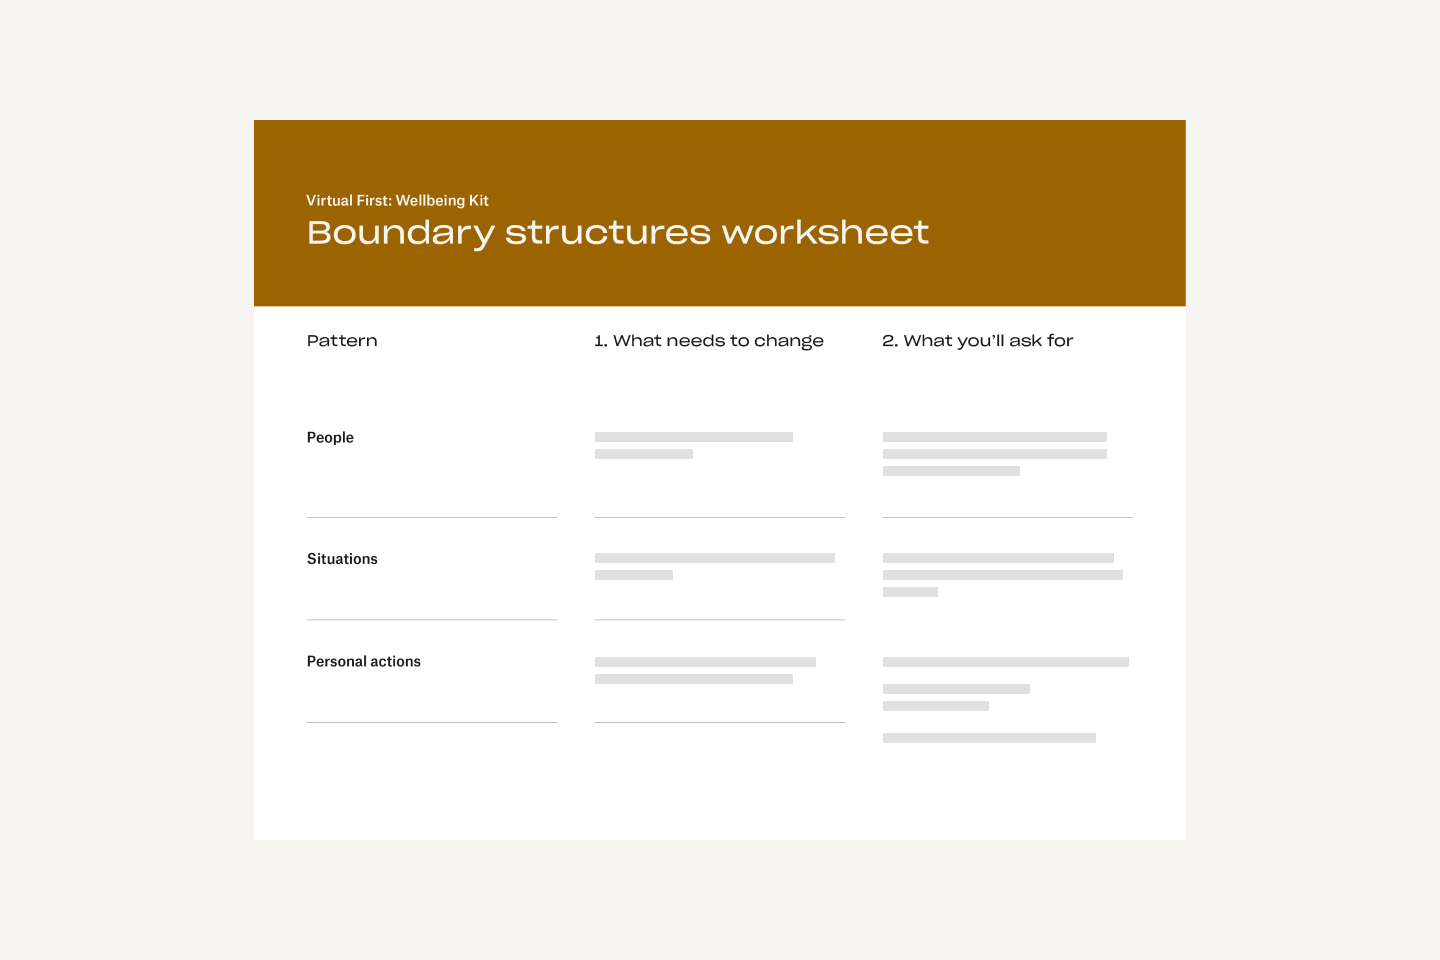 Boundary structures worksheet